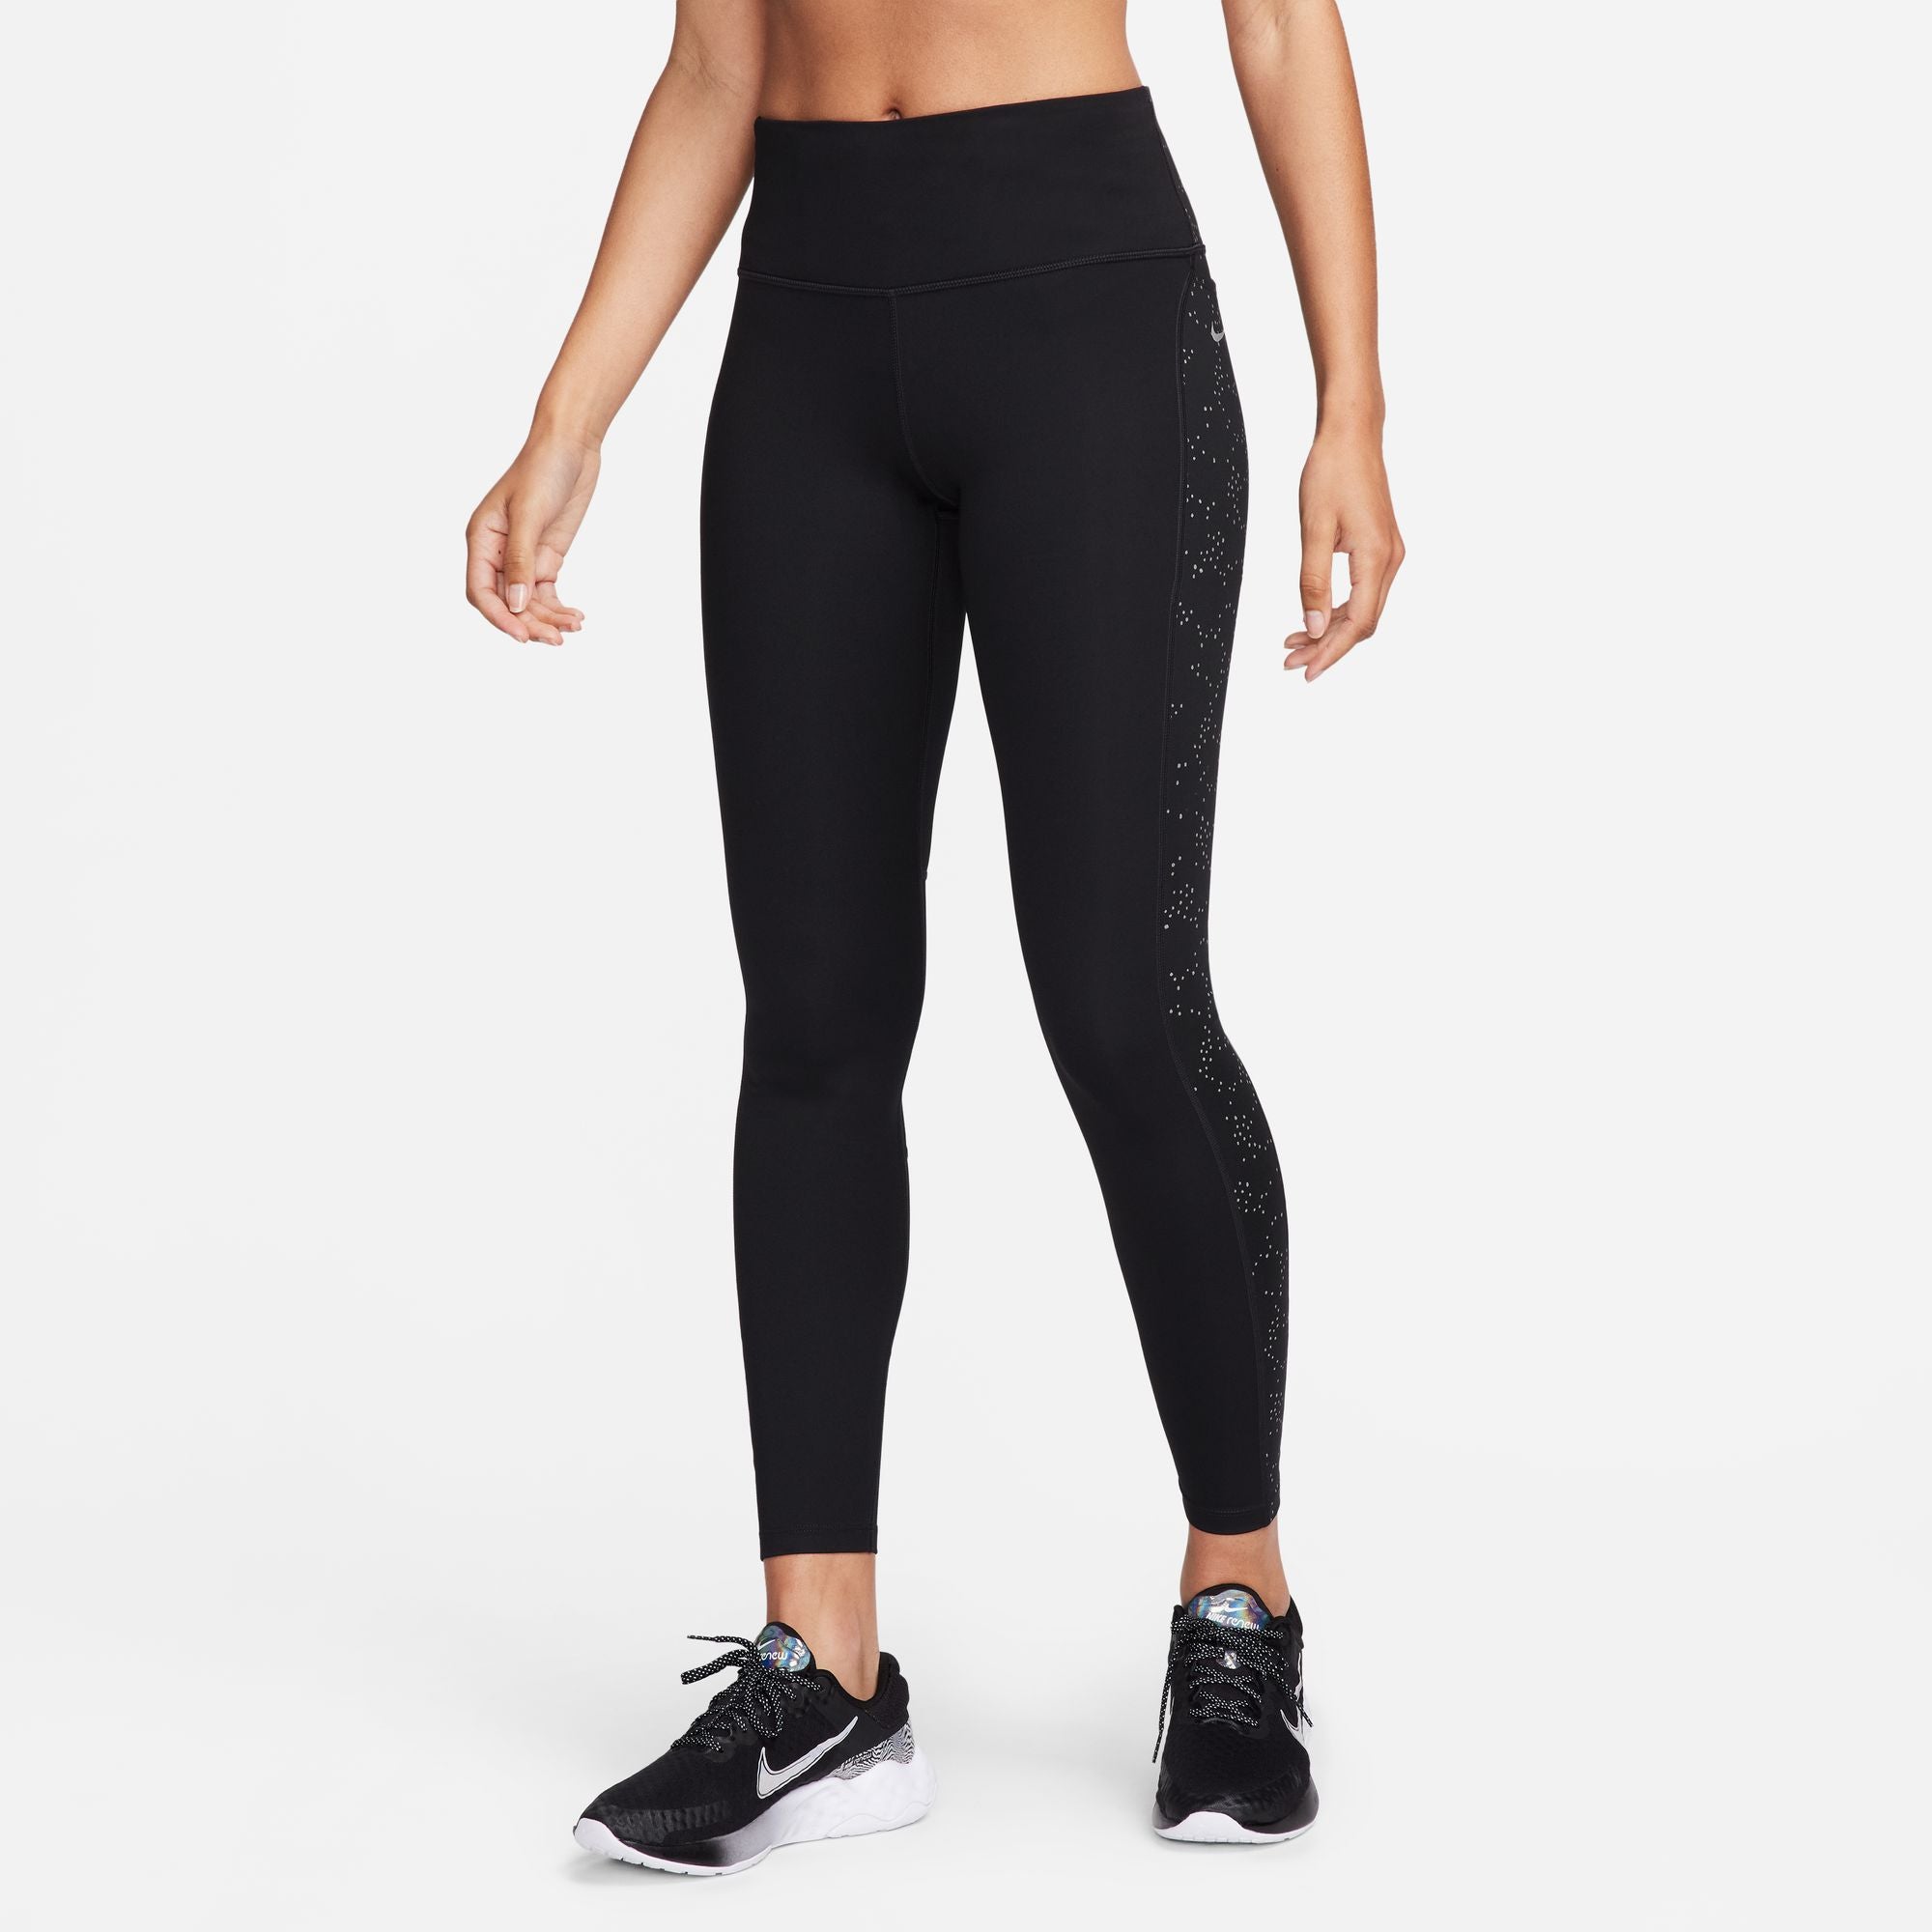 Nike Women's One Luxe Training Leggings. Back floral. Size Small